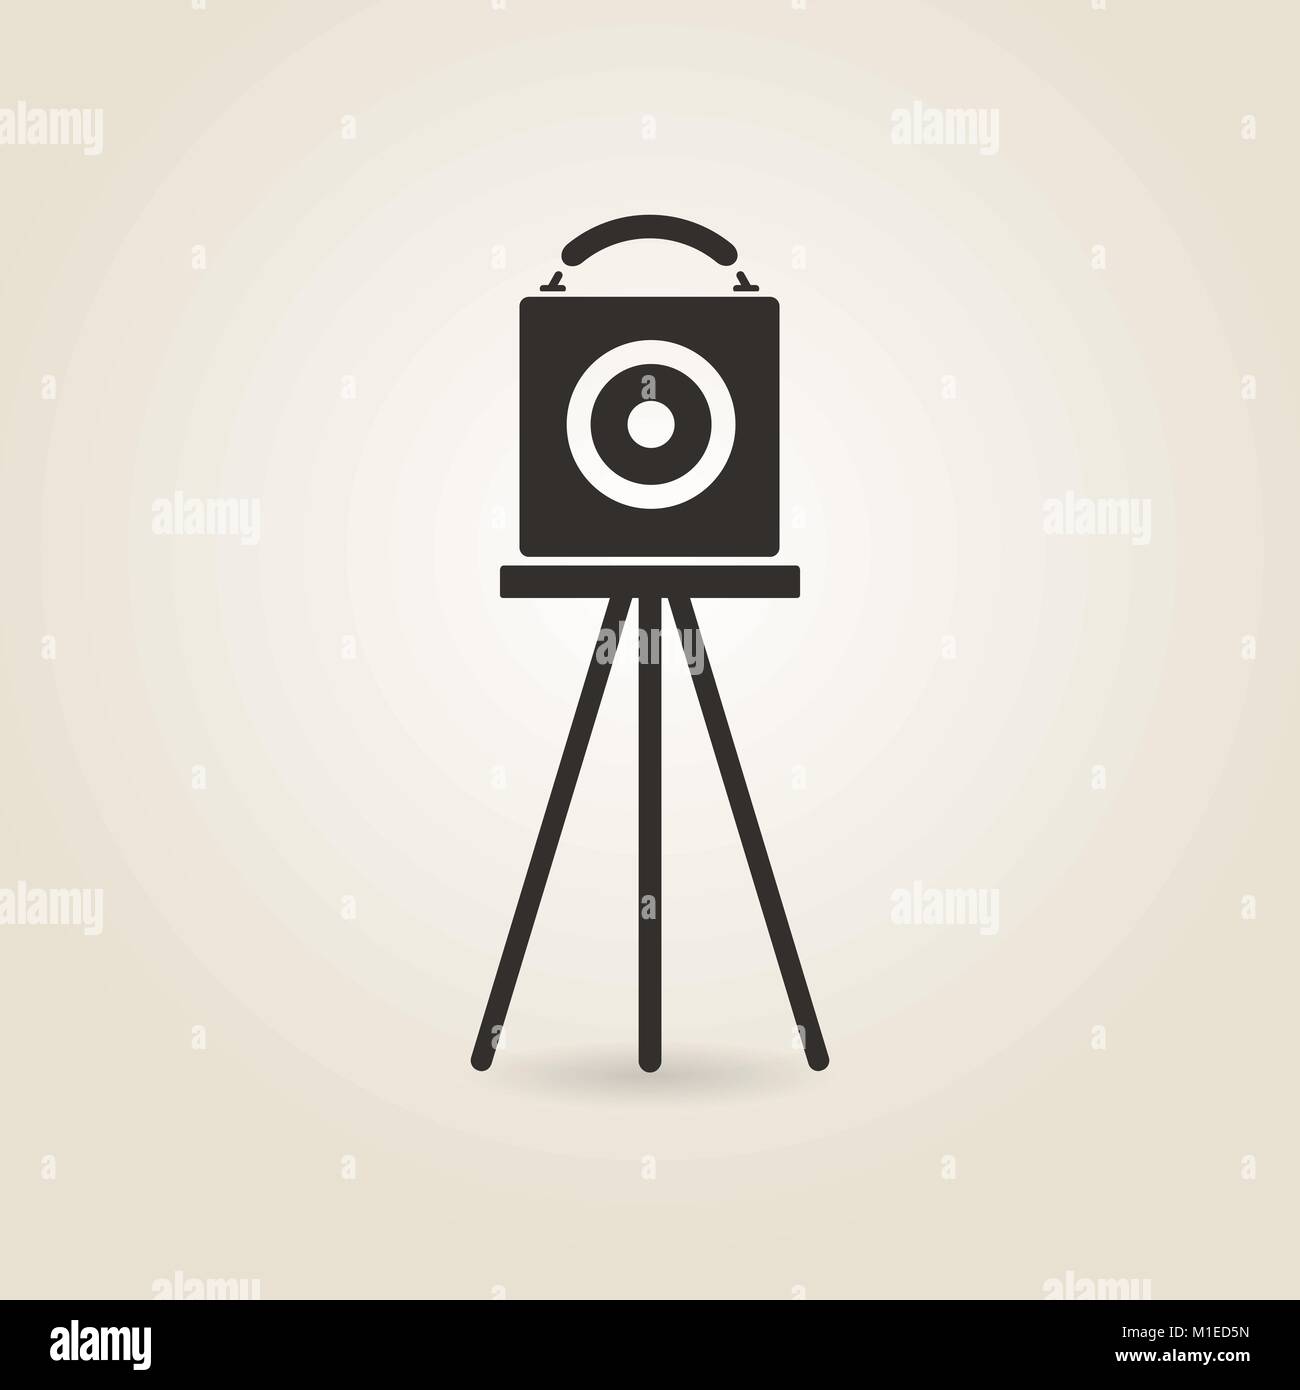 vintage camera icon on light background Stock Vector